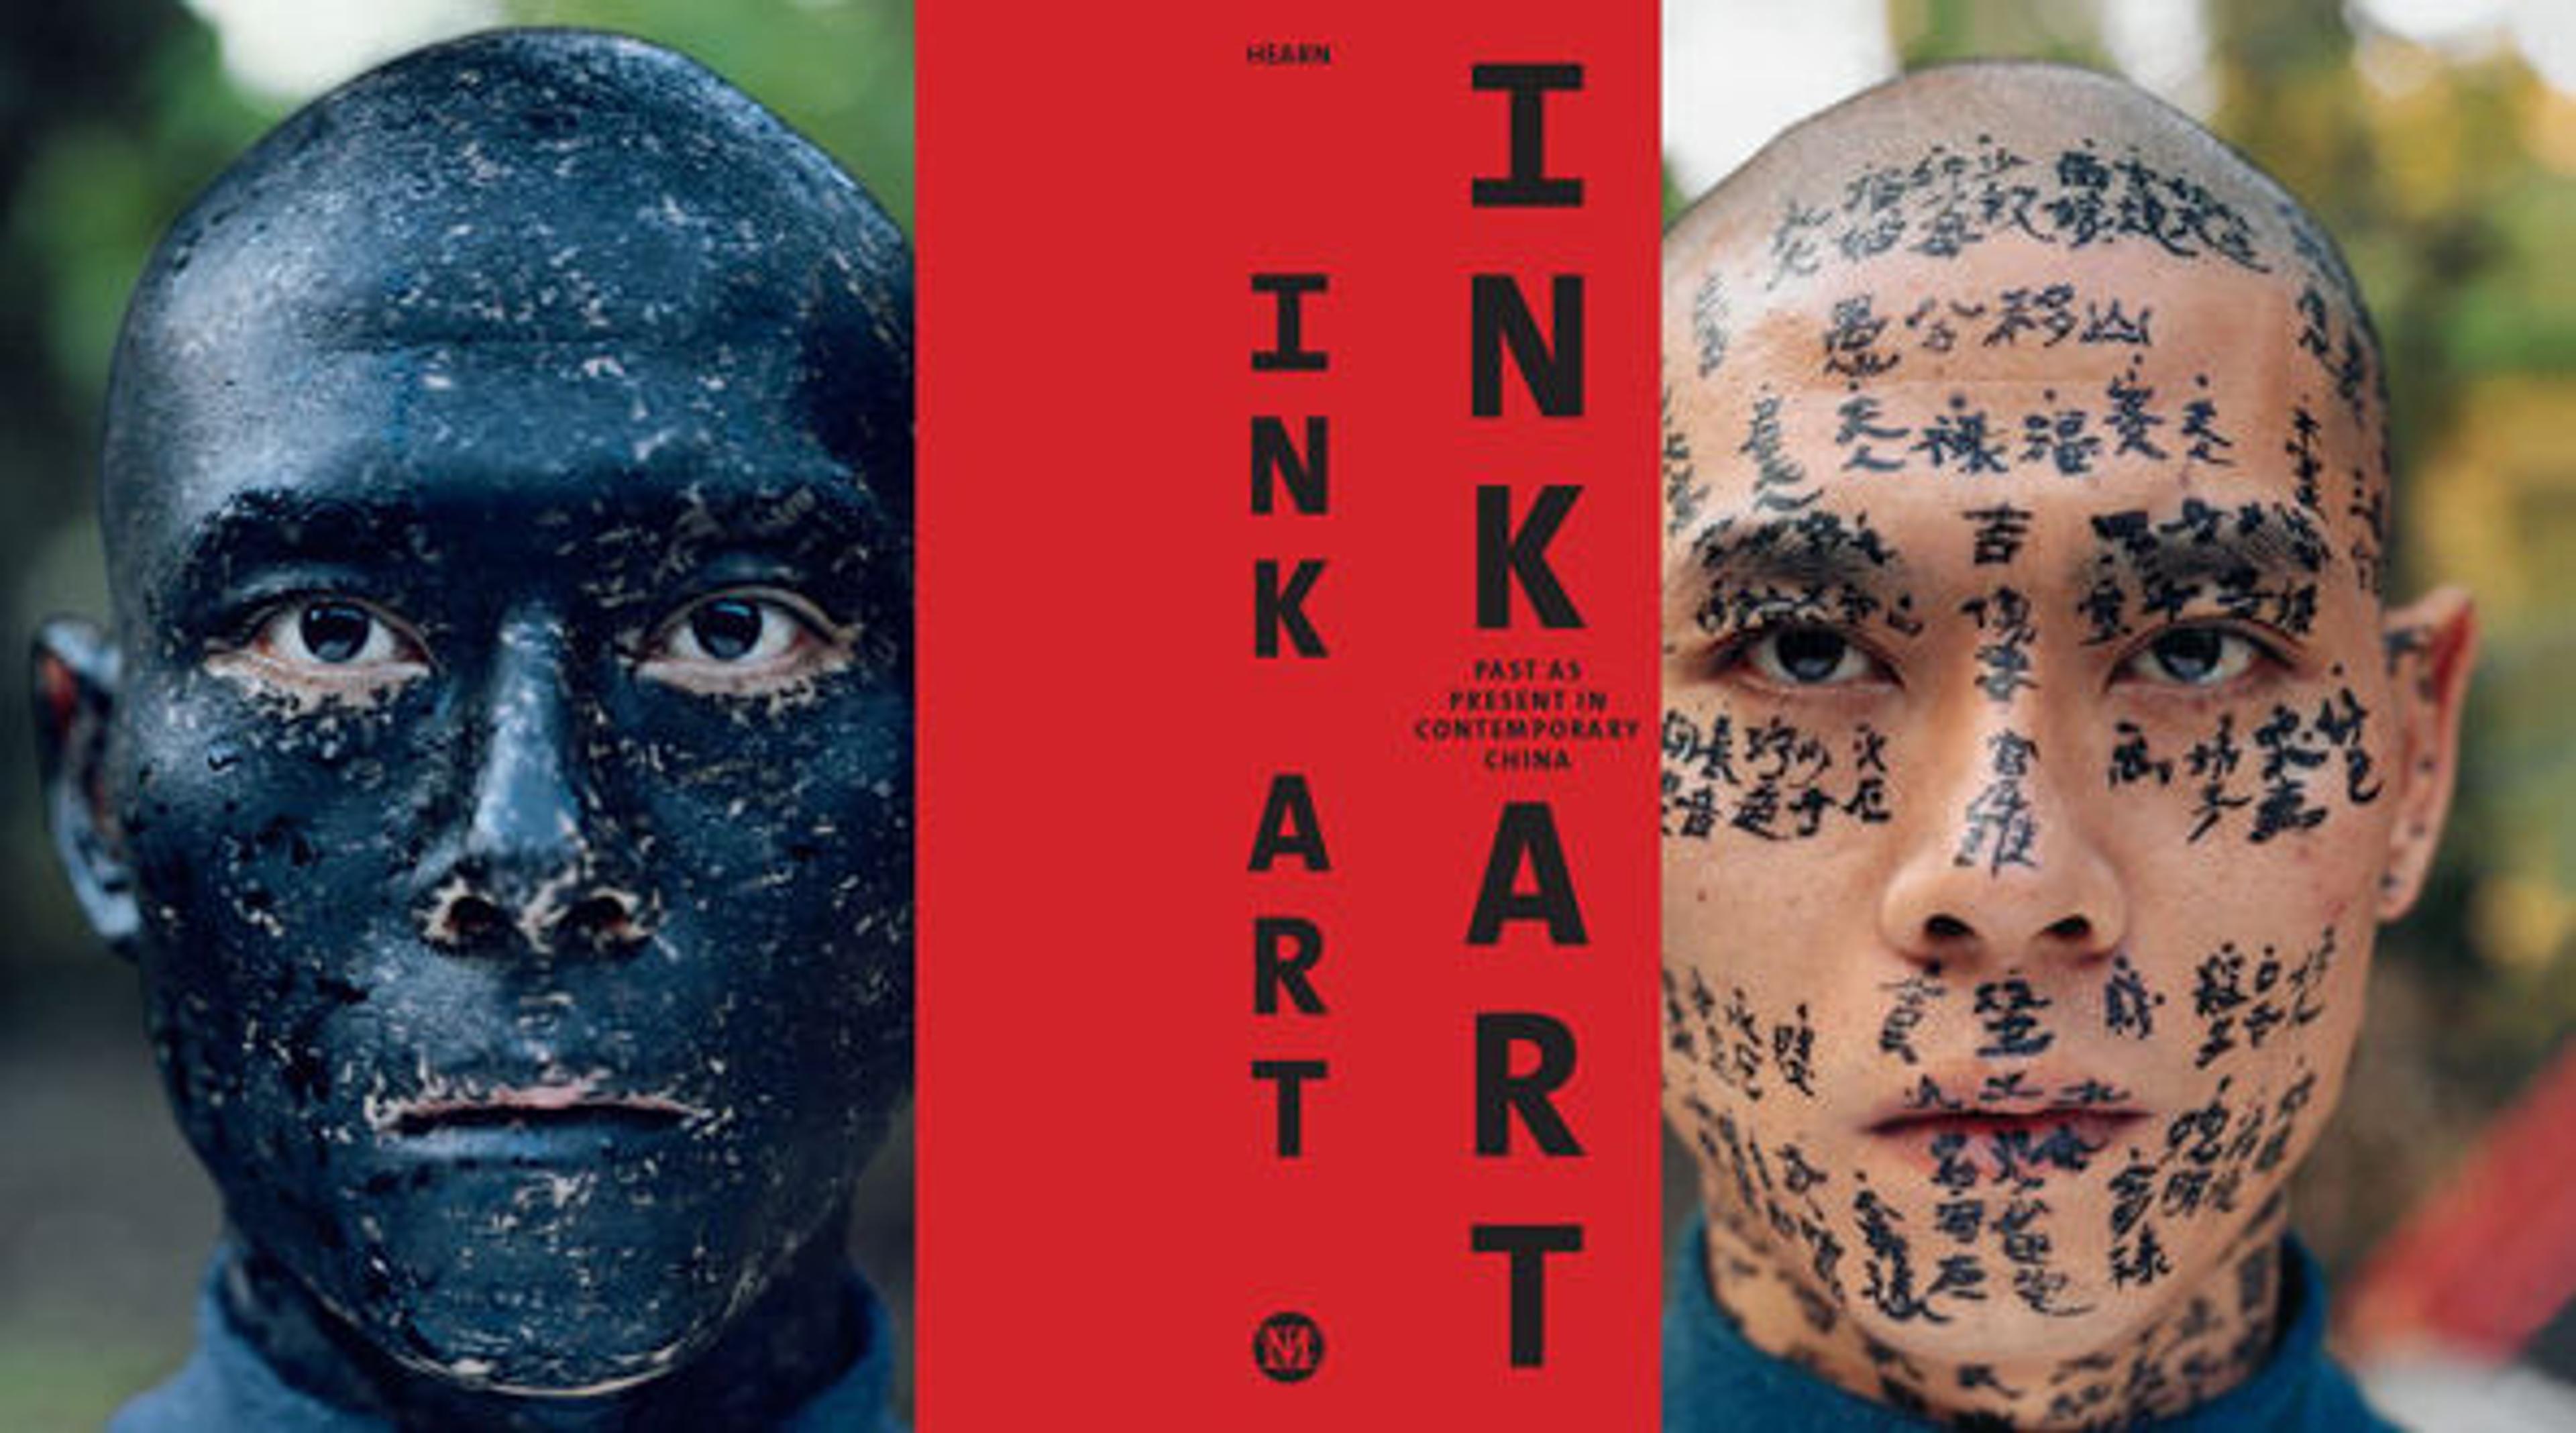 Ink Art Catalogue Cover